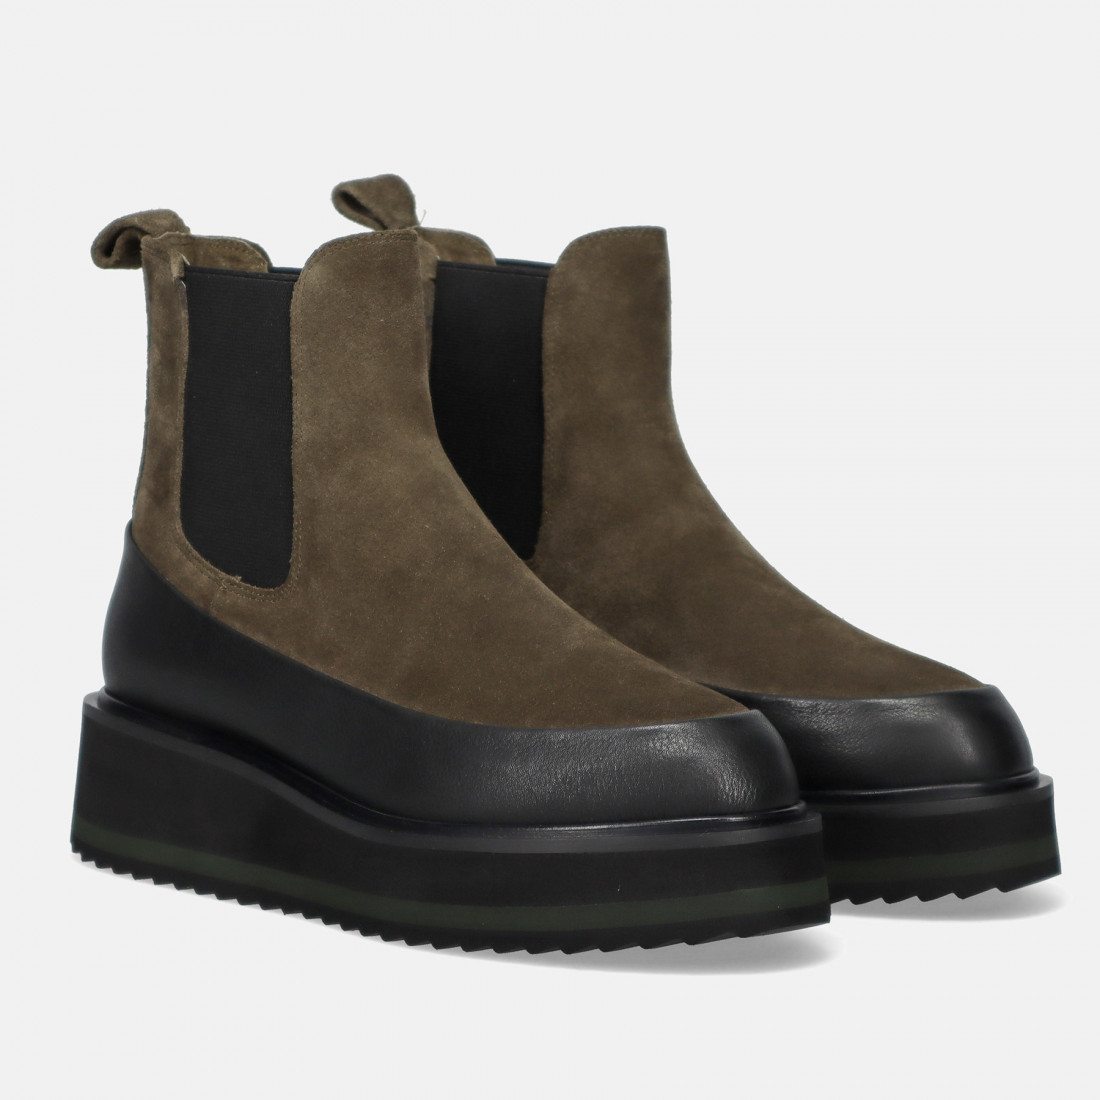 Rahya Gray Chelsea boot in olive suede with low wedge